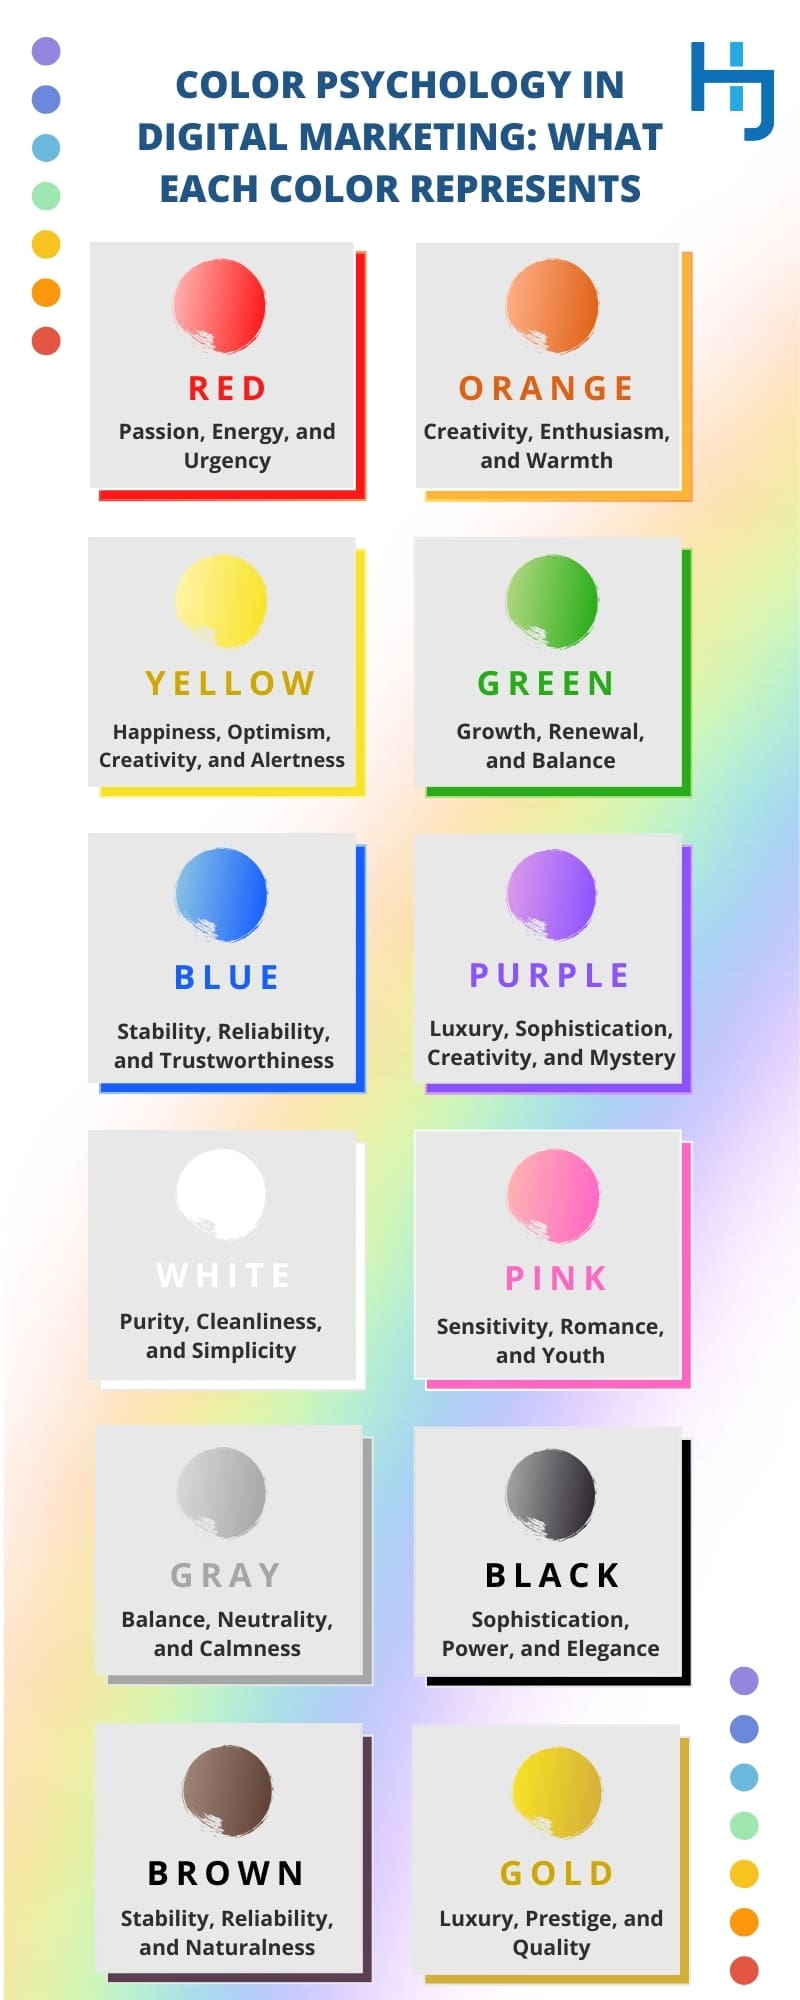 Color Psychology in Digital Marketing: What Each Color Represents